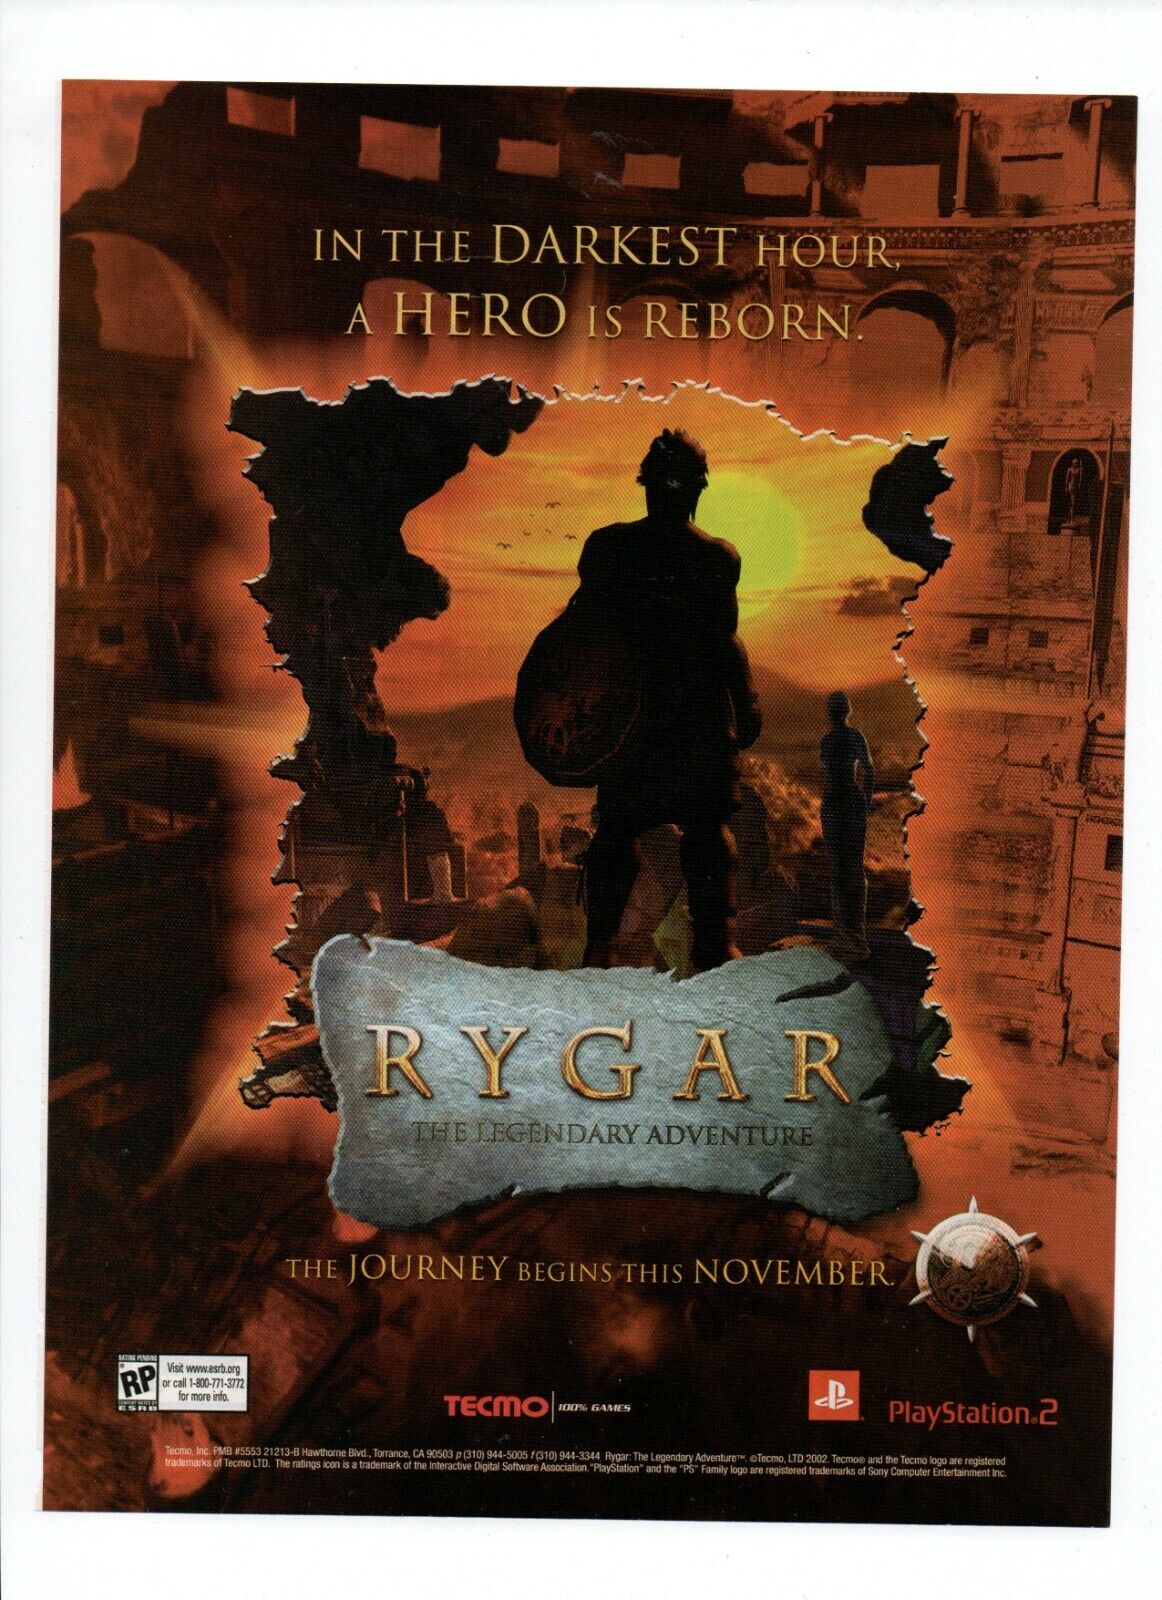 Rygar The Legendary Adventure Playstation PS2 - 2002 Video Game Print Ad